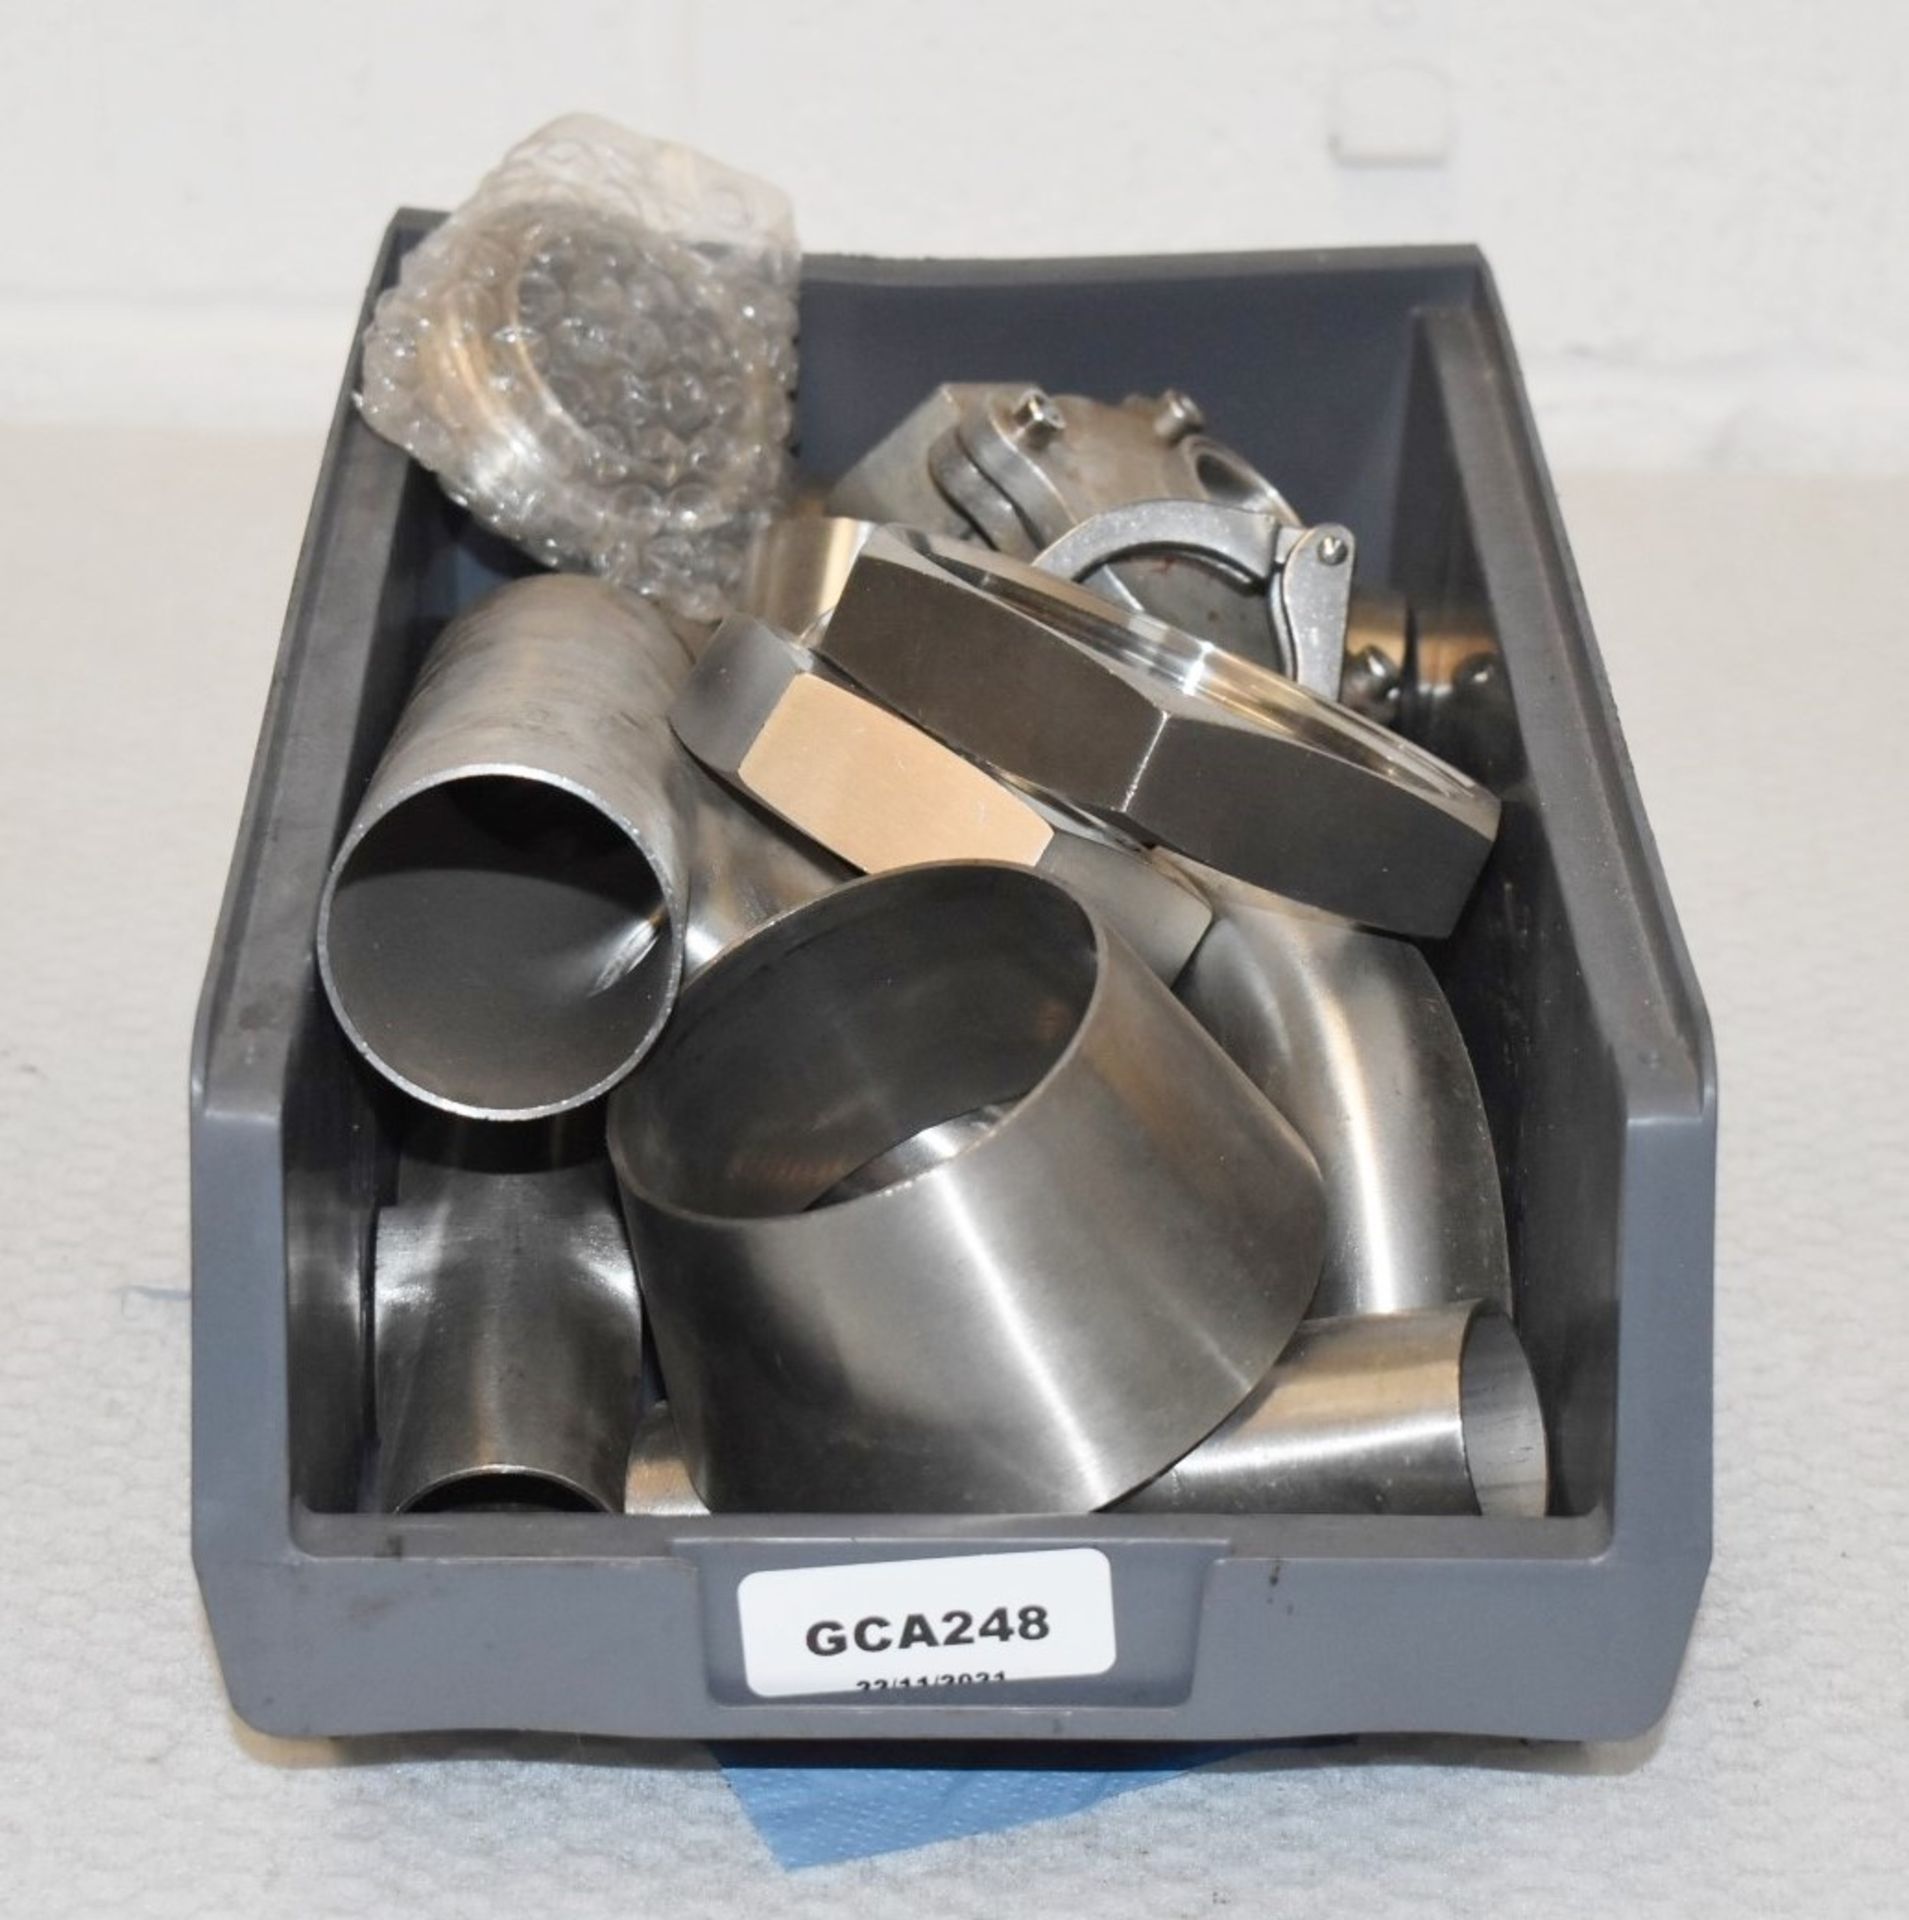 Assorted Job Lot of Stainless Steel Fittings For Brewery Equipment - Includes Approx 37 Pieces - - Image 2 of 8